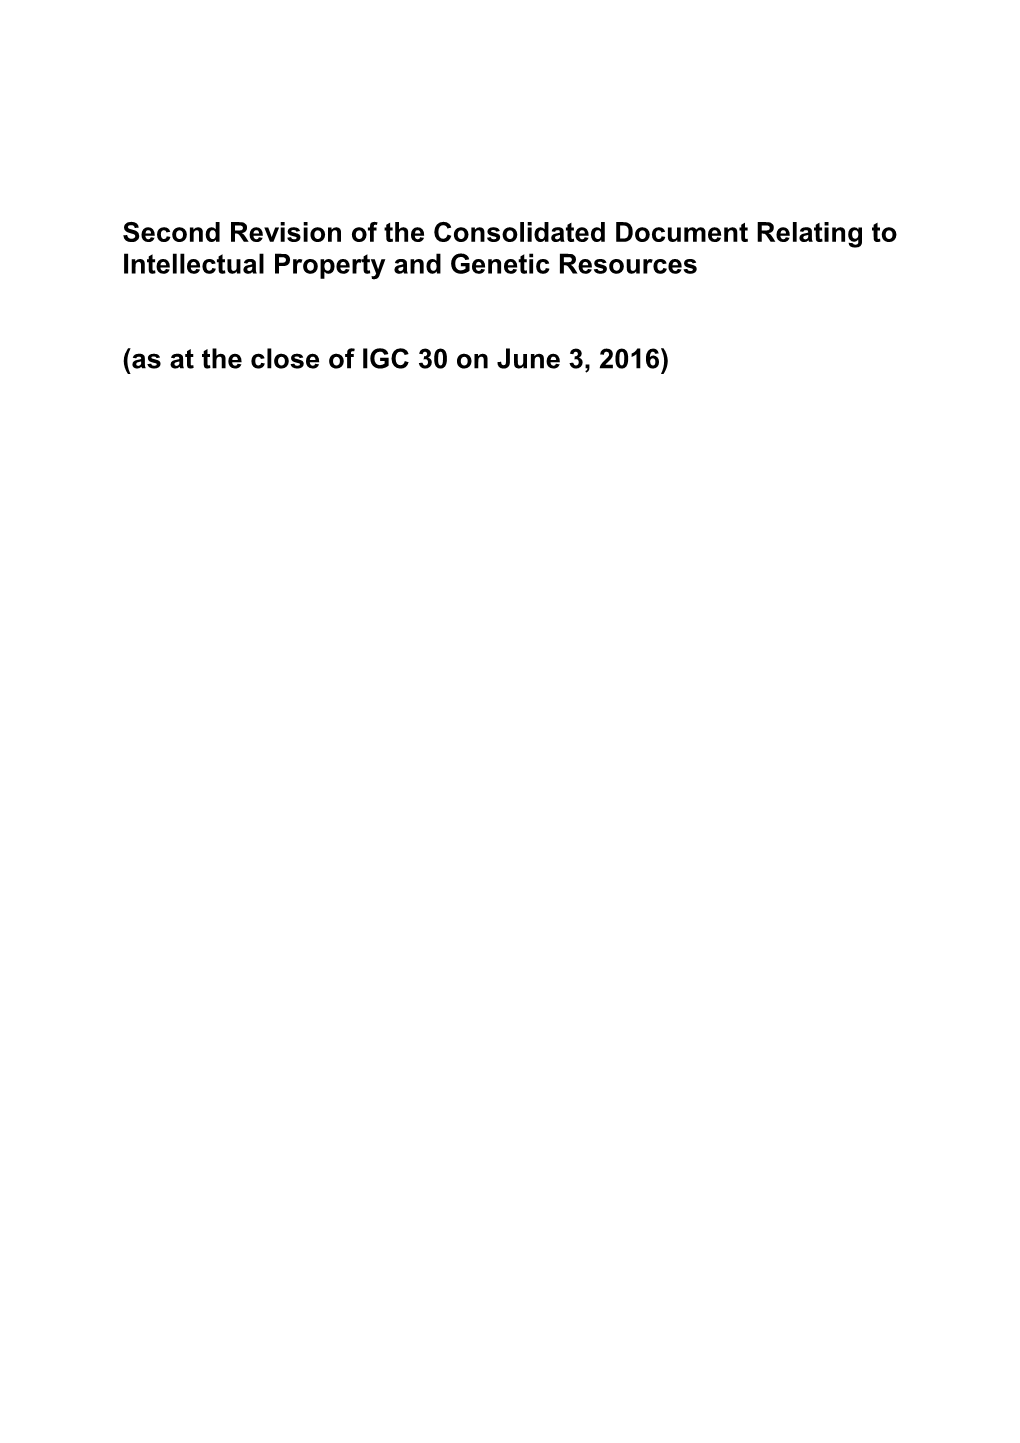 Second Revision of the Consolidated Document Relating to Intellectual Property and Genetic